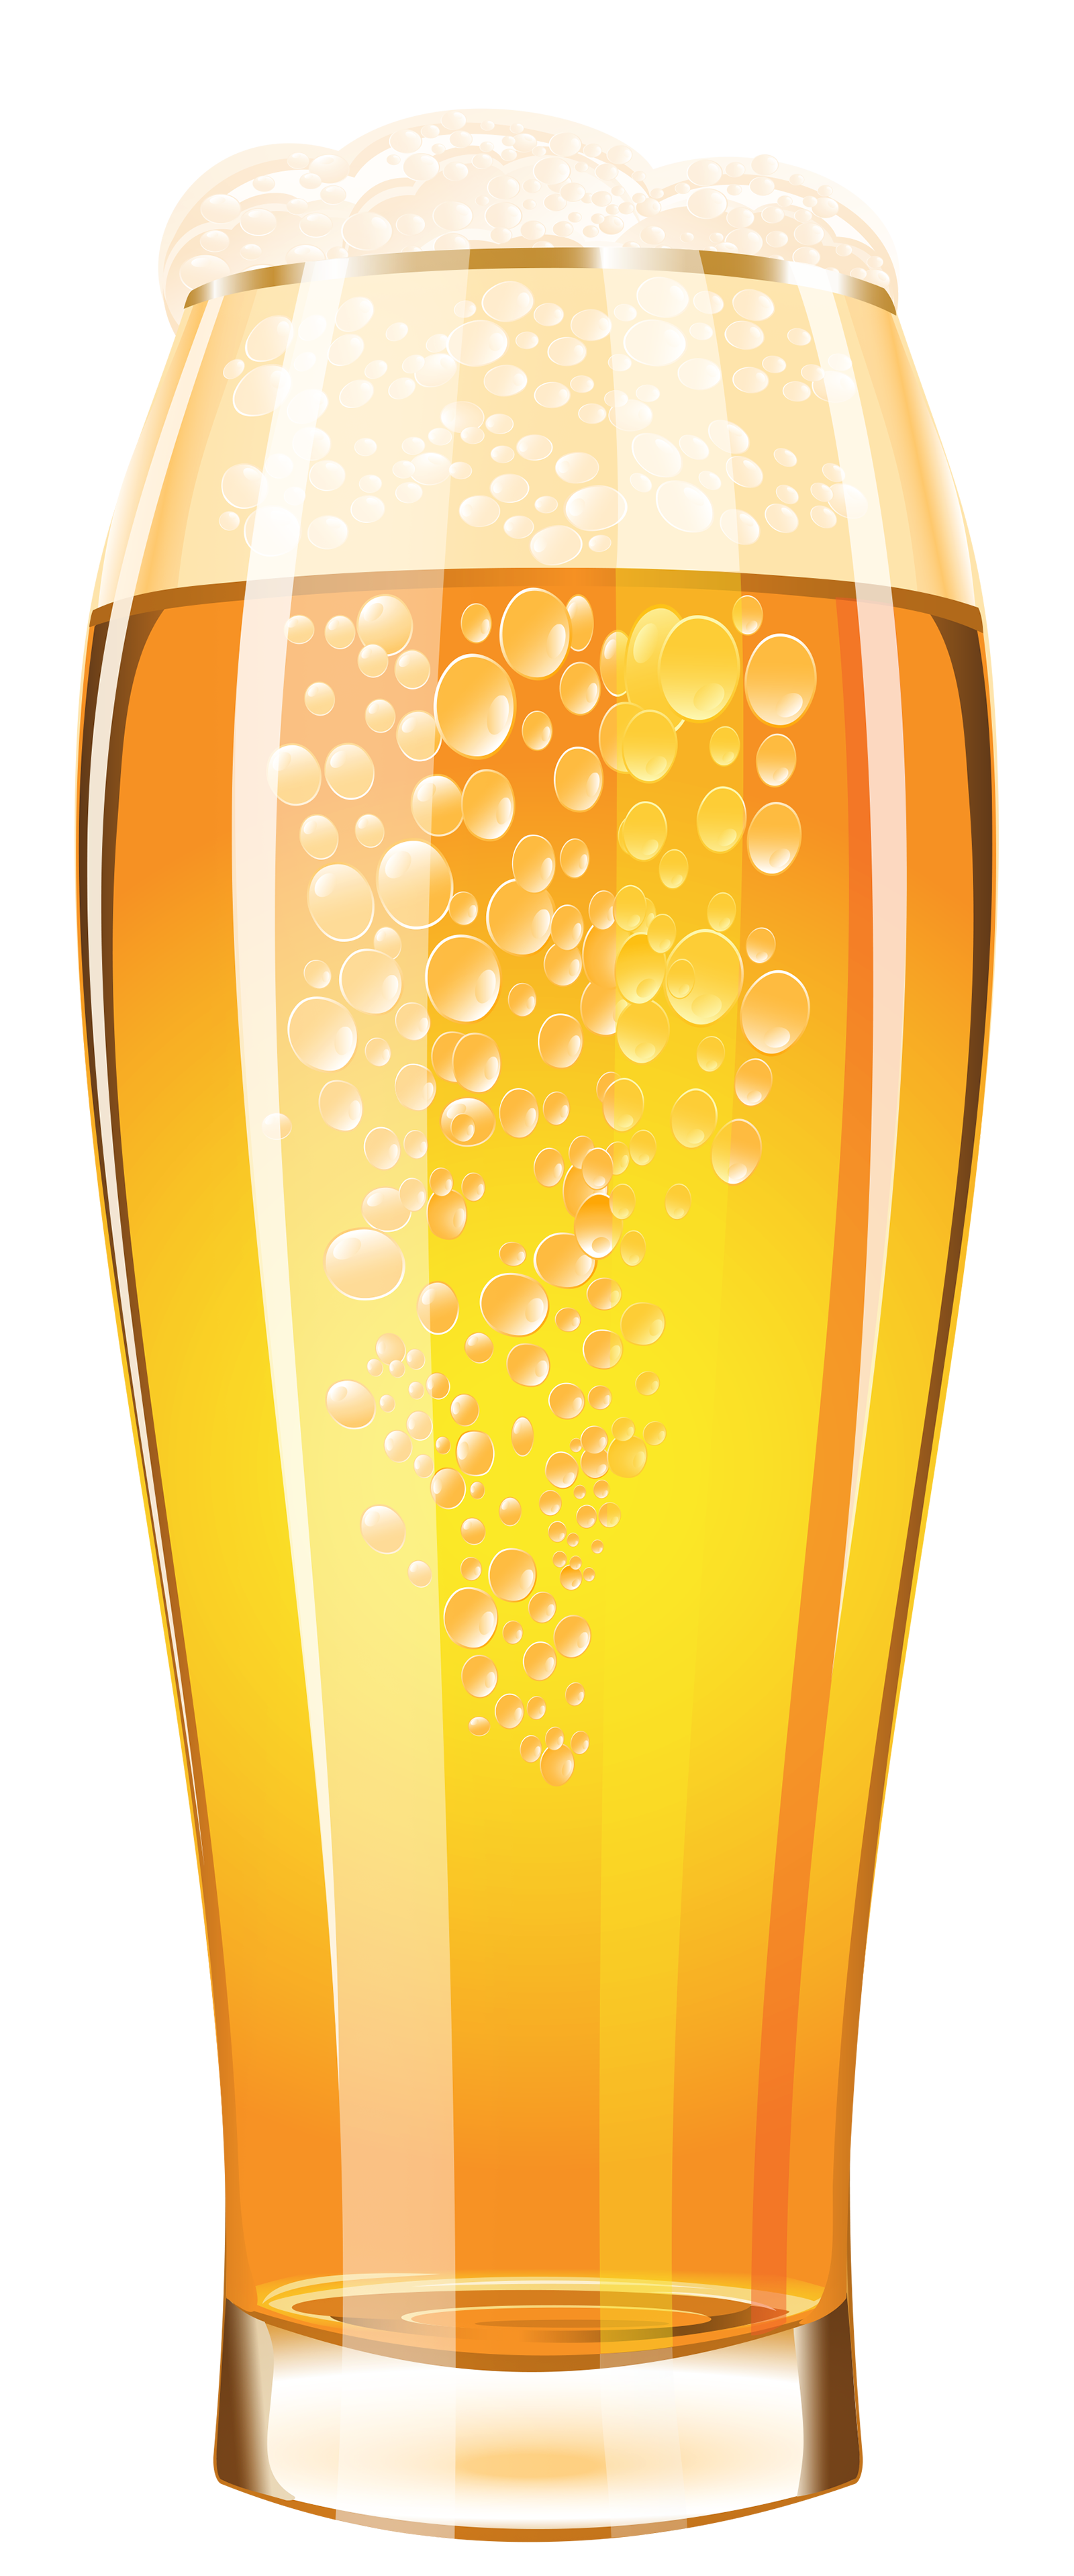 Clipart cup beer. Glass of png vector